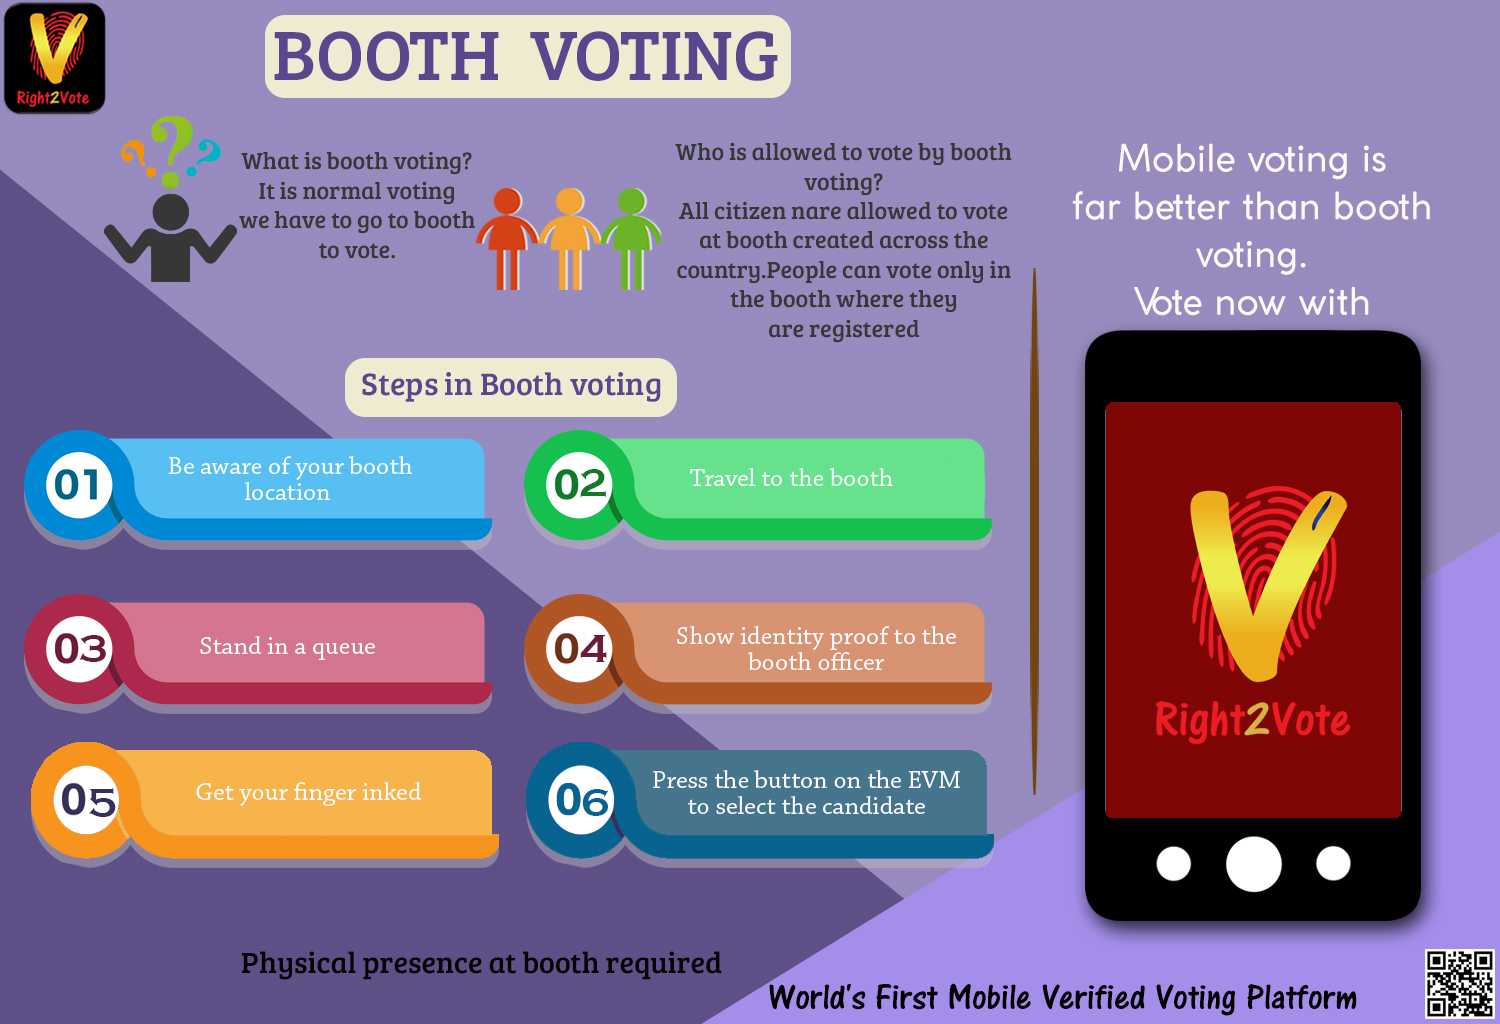 Booth voting